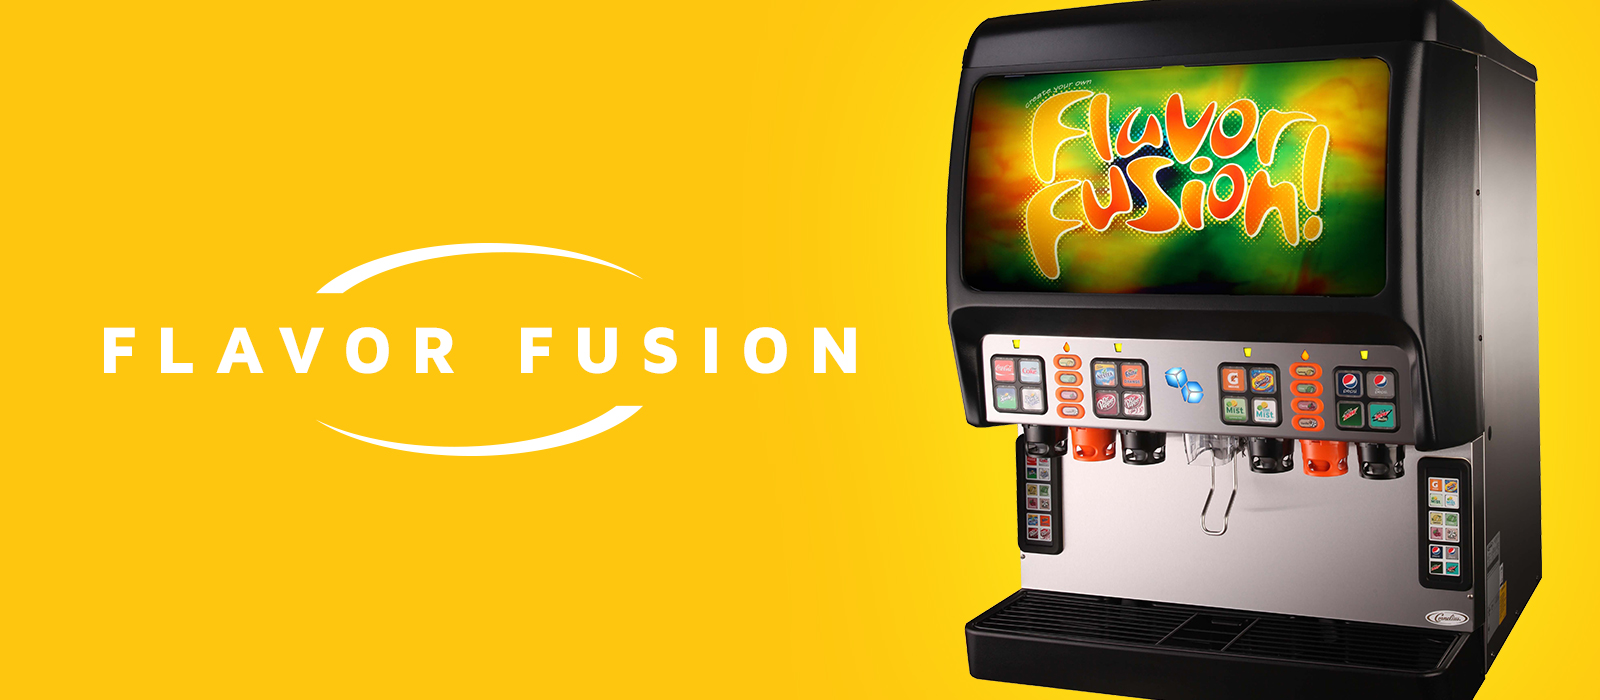 Bevco Provides An Array Of Beverage Dispensers